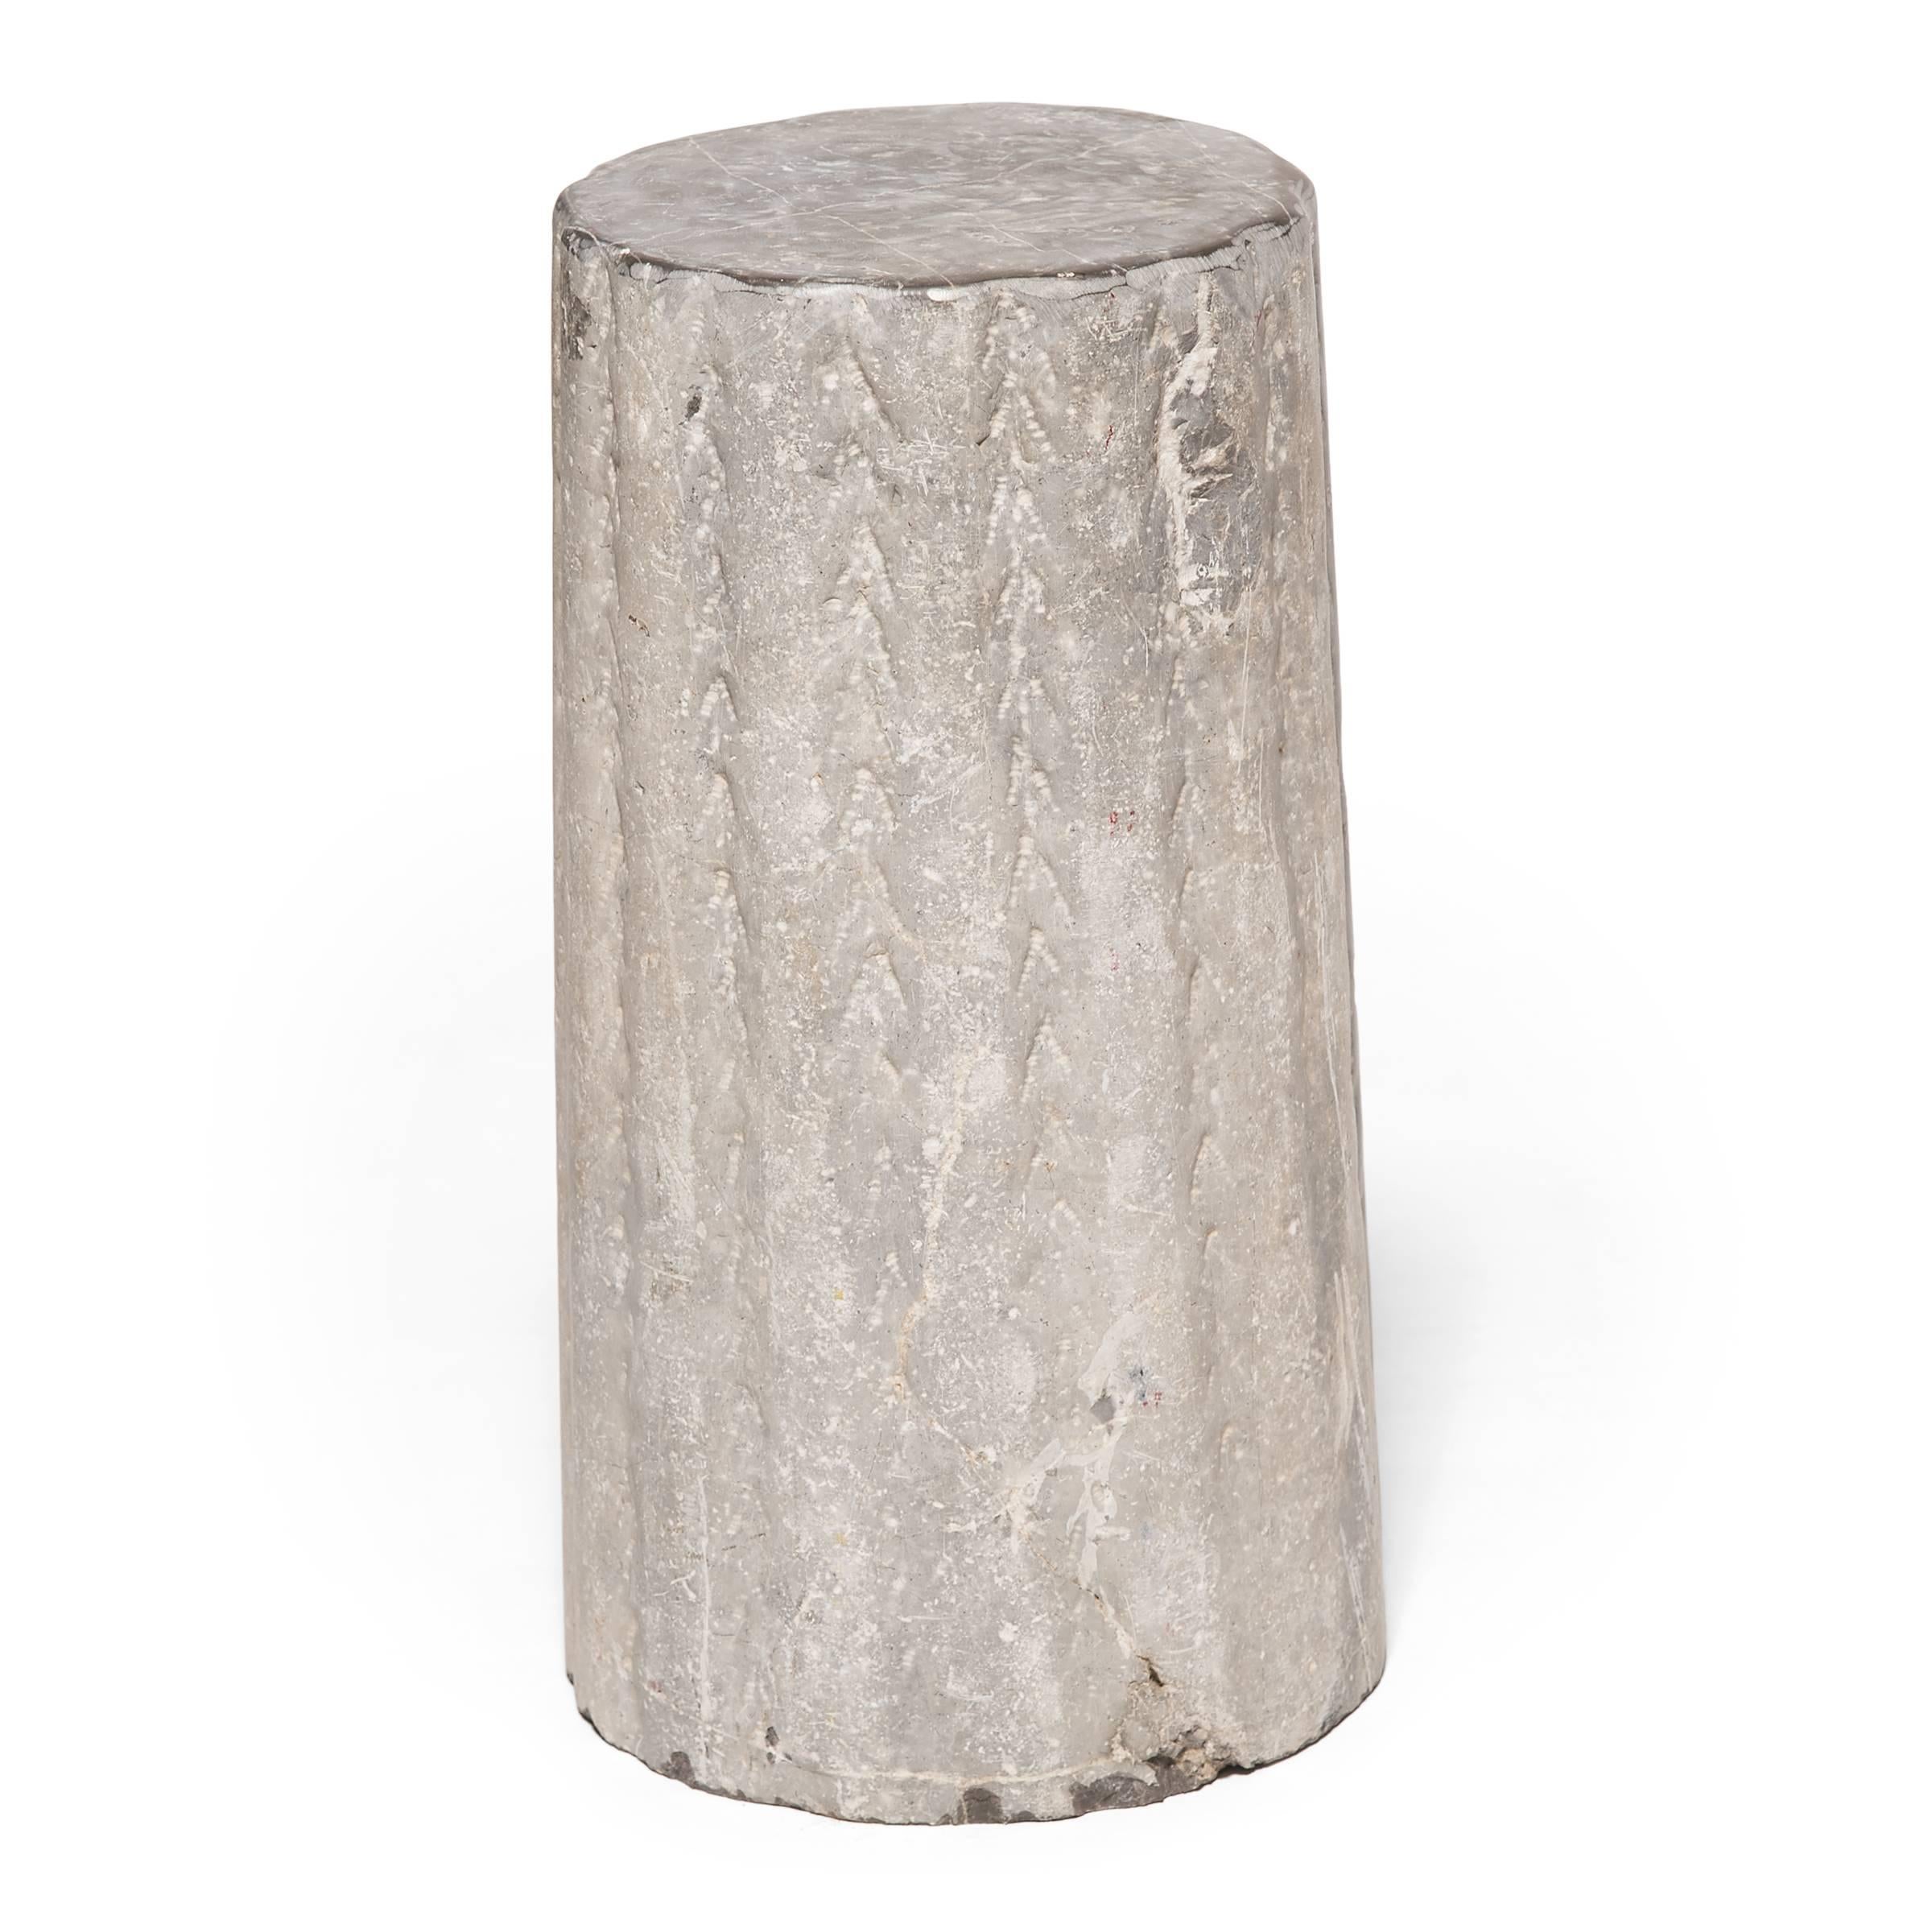 With a textured and ribbed surface, this hand-carved stone once ground grain and nuts at a Hebei province wind or watermill. Over a hundred years old, the stone’s surface has worn down through use, leaving only a hint of its original texture. A